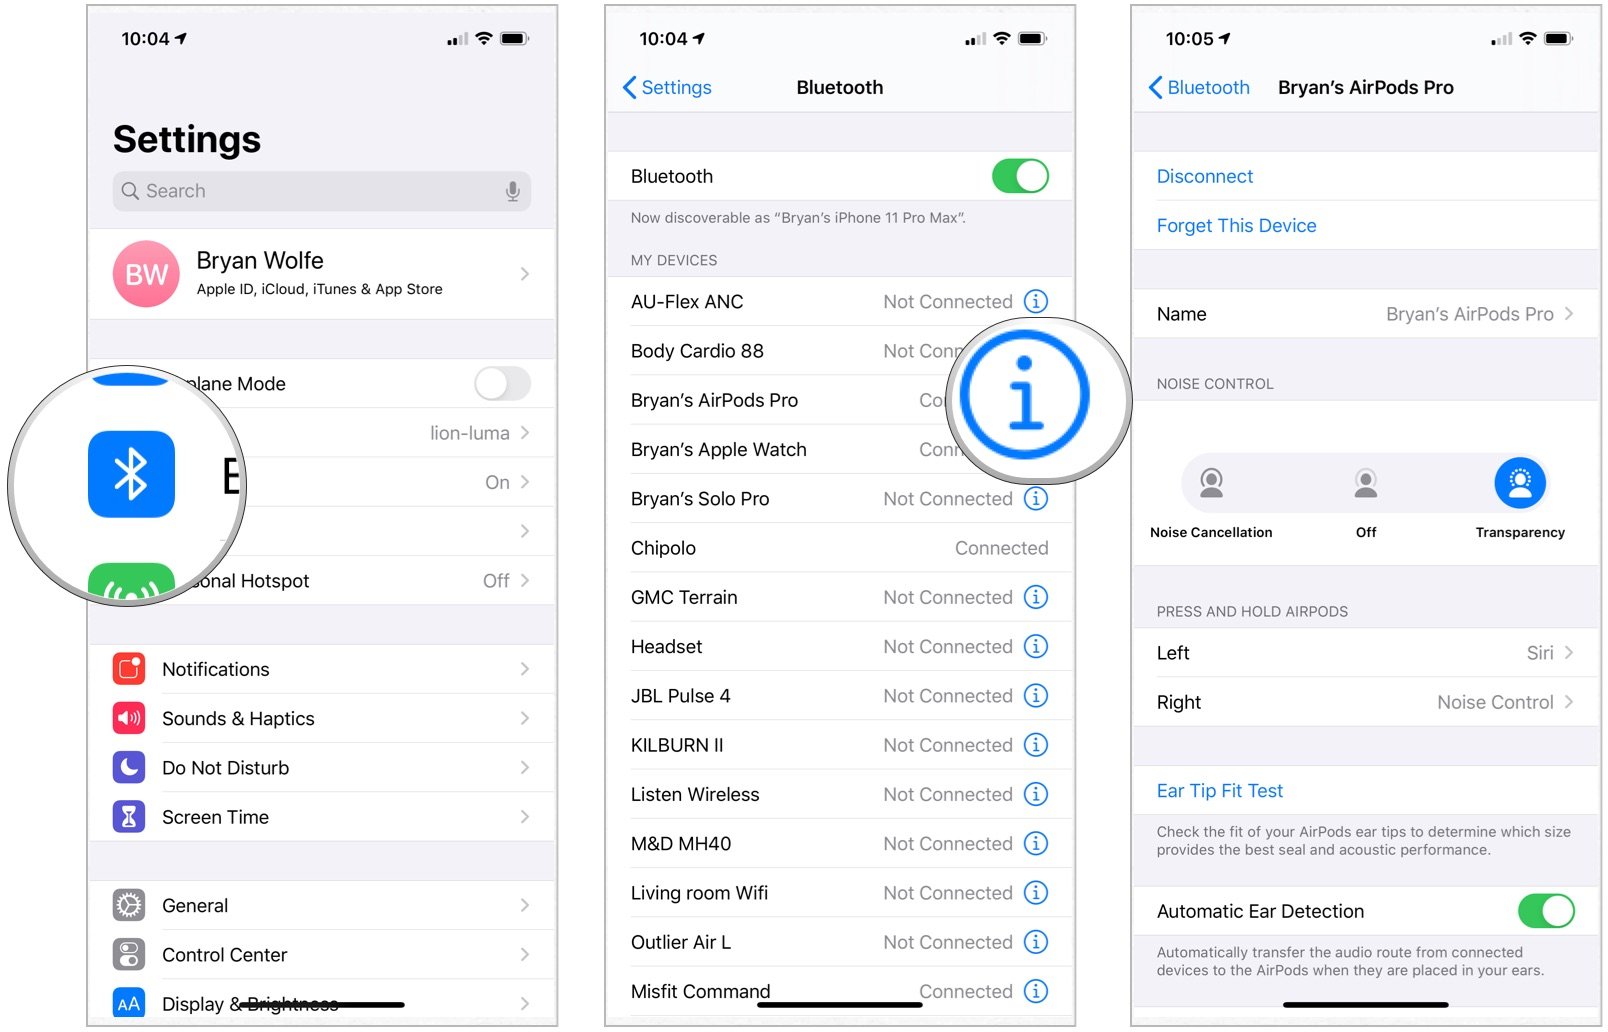 Change Airpods Pro sound settings through iPhone